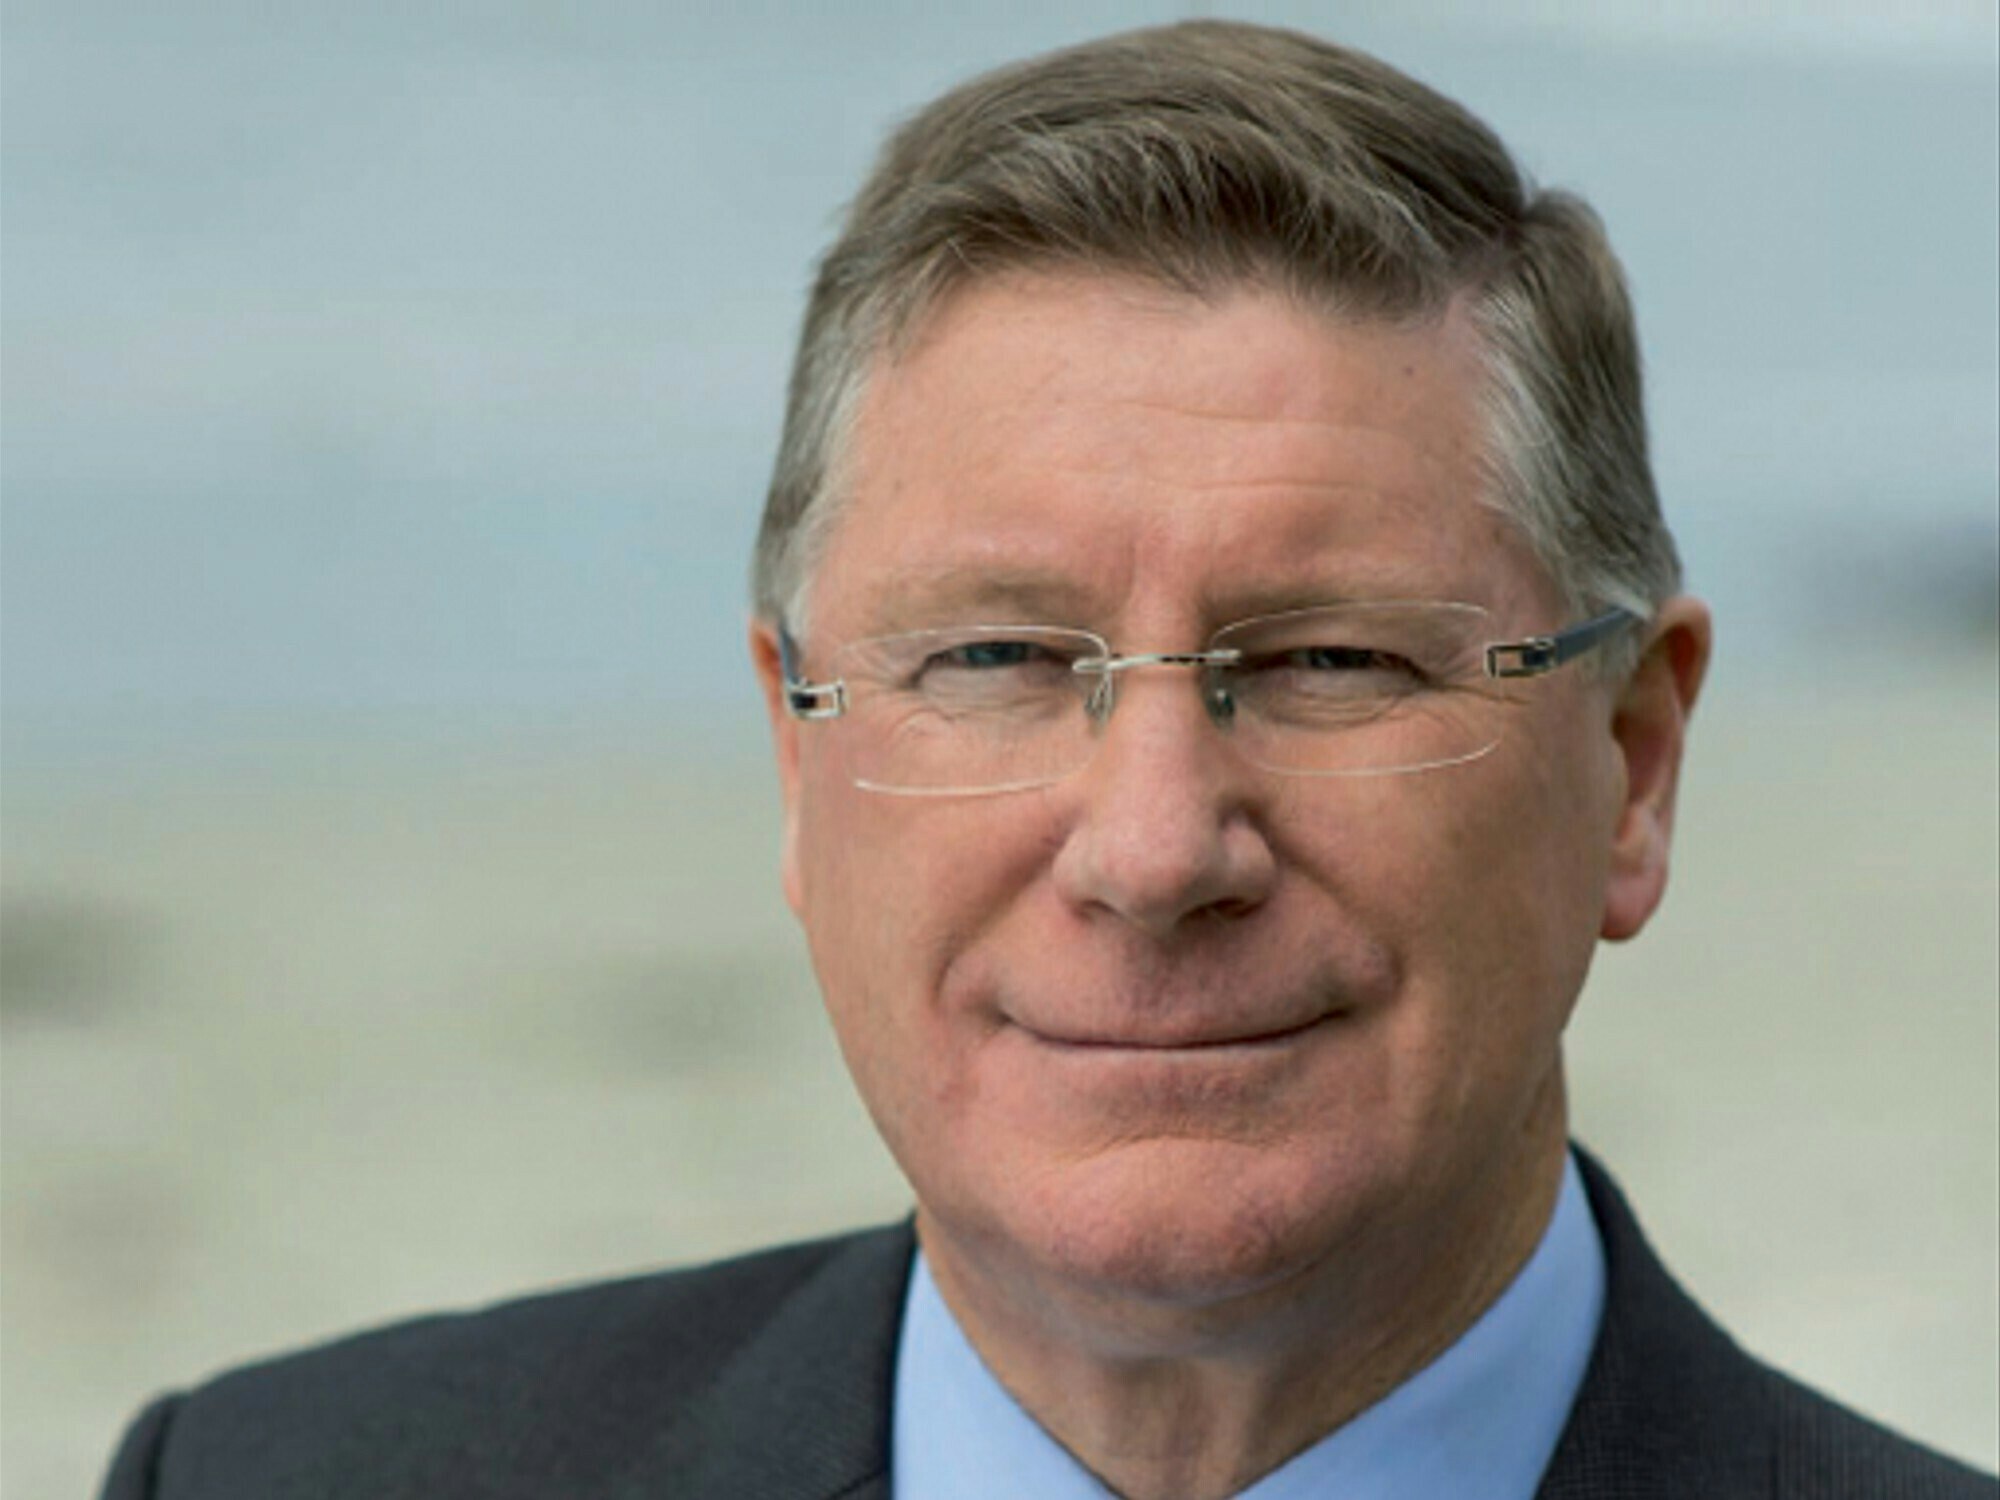 <p>Dr Denis Napthine has resigned from his role as Chair of the NDIA and will be replaced by Jim Minto, who will act as the NDIA Chair until a new person is appointed. [Source: Social media]</p>
